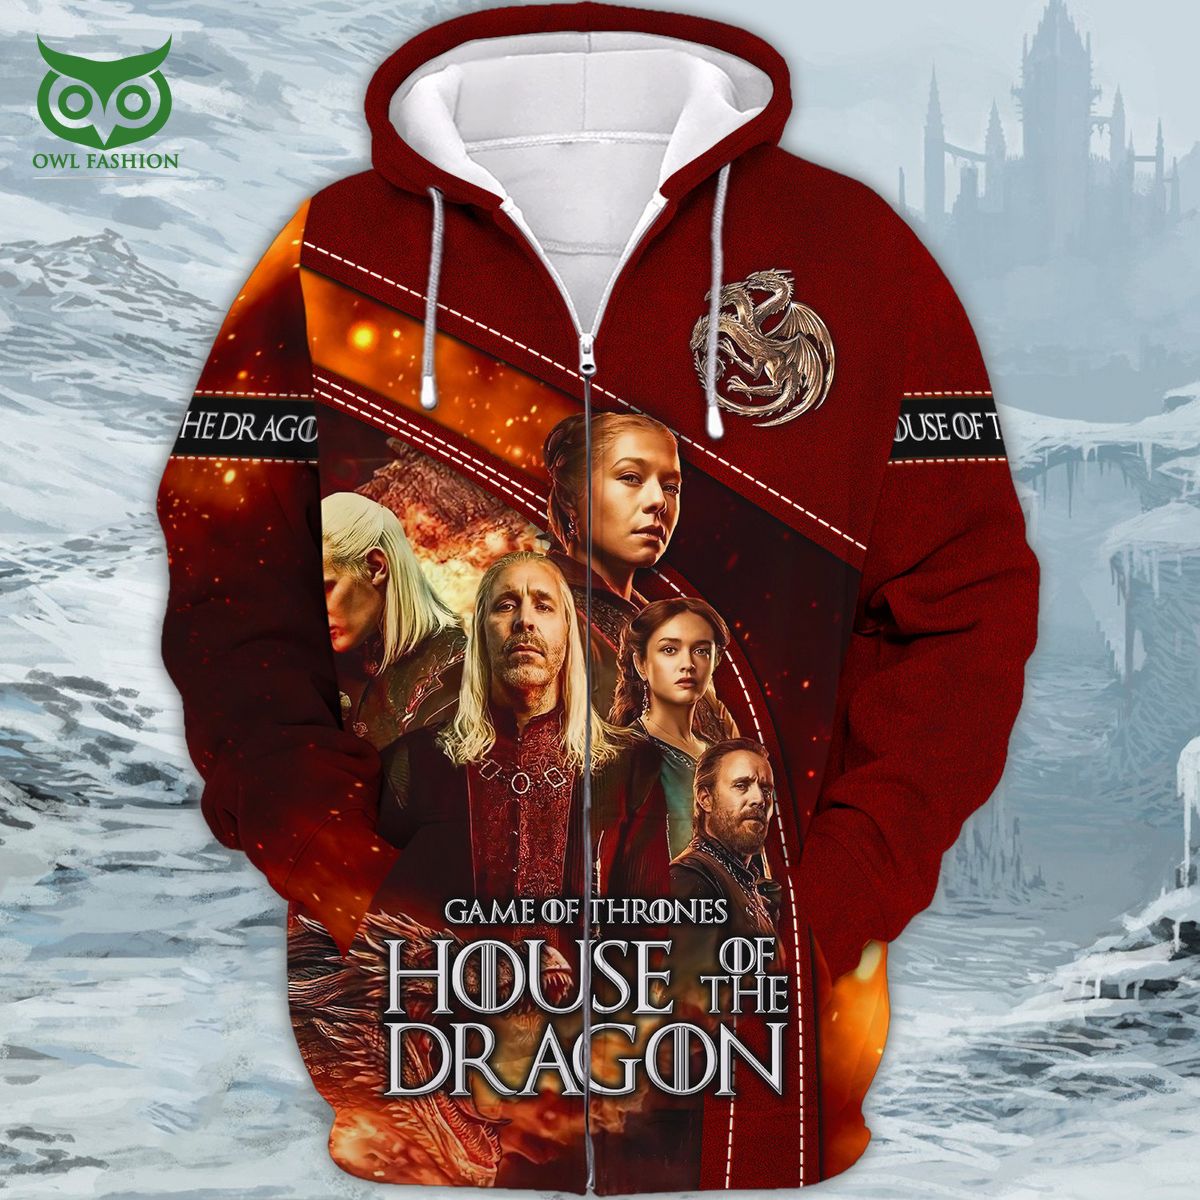 game of thrones house of the dragon 3d zipper hoodie 1 lf4Zf